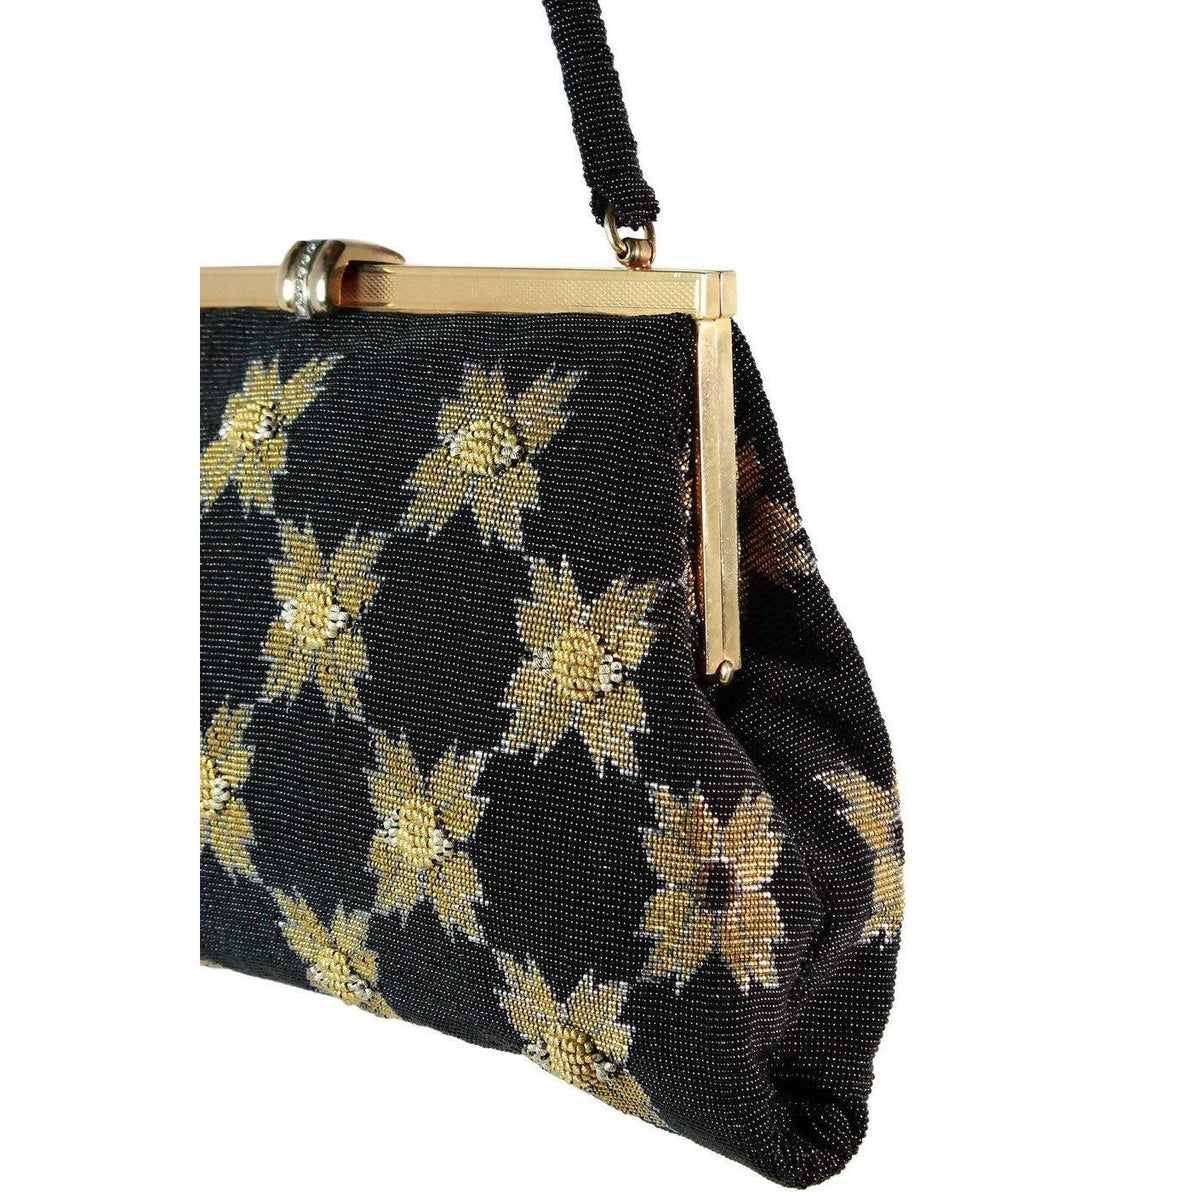 1950s Black and Gold Caviar Beaded Floral Evening Purse